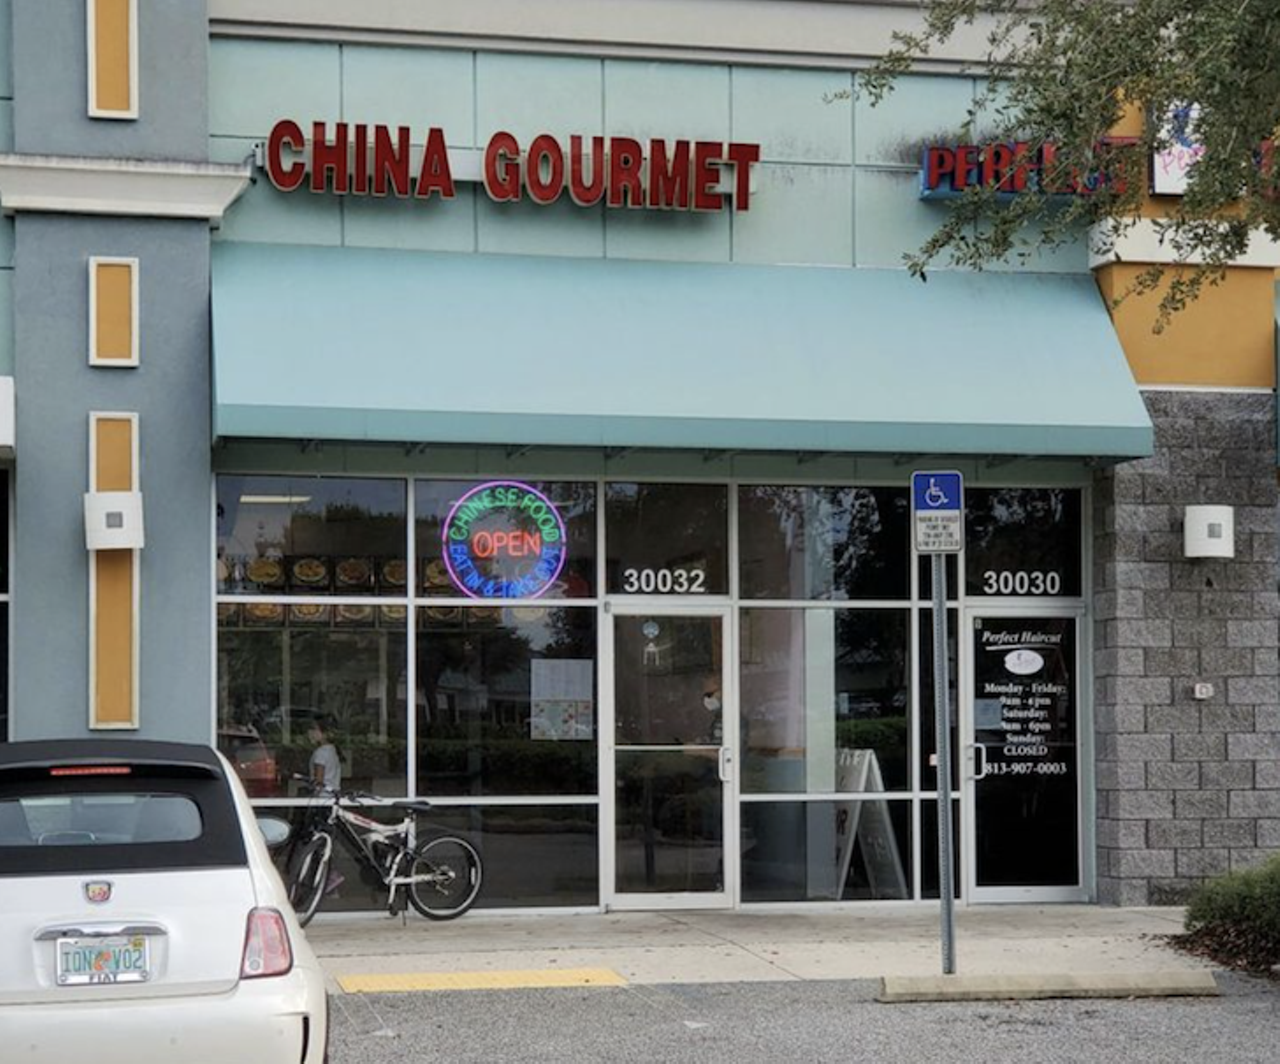 13. China Gourmet
30032 County Line Rd Wesley Chapel, (813) 994-0999
&#147;Hands down the best Chinese food in Florida. Period. Being from New York, it was a quest for me to find "good" Chinese food. This went beyond all expectations. It's not good....it's amazing, authentic and absolutely delicious!!!" - Emily K.
Photo via China Gourmet/Yelp